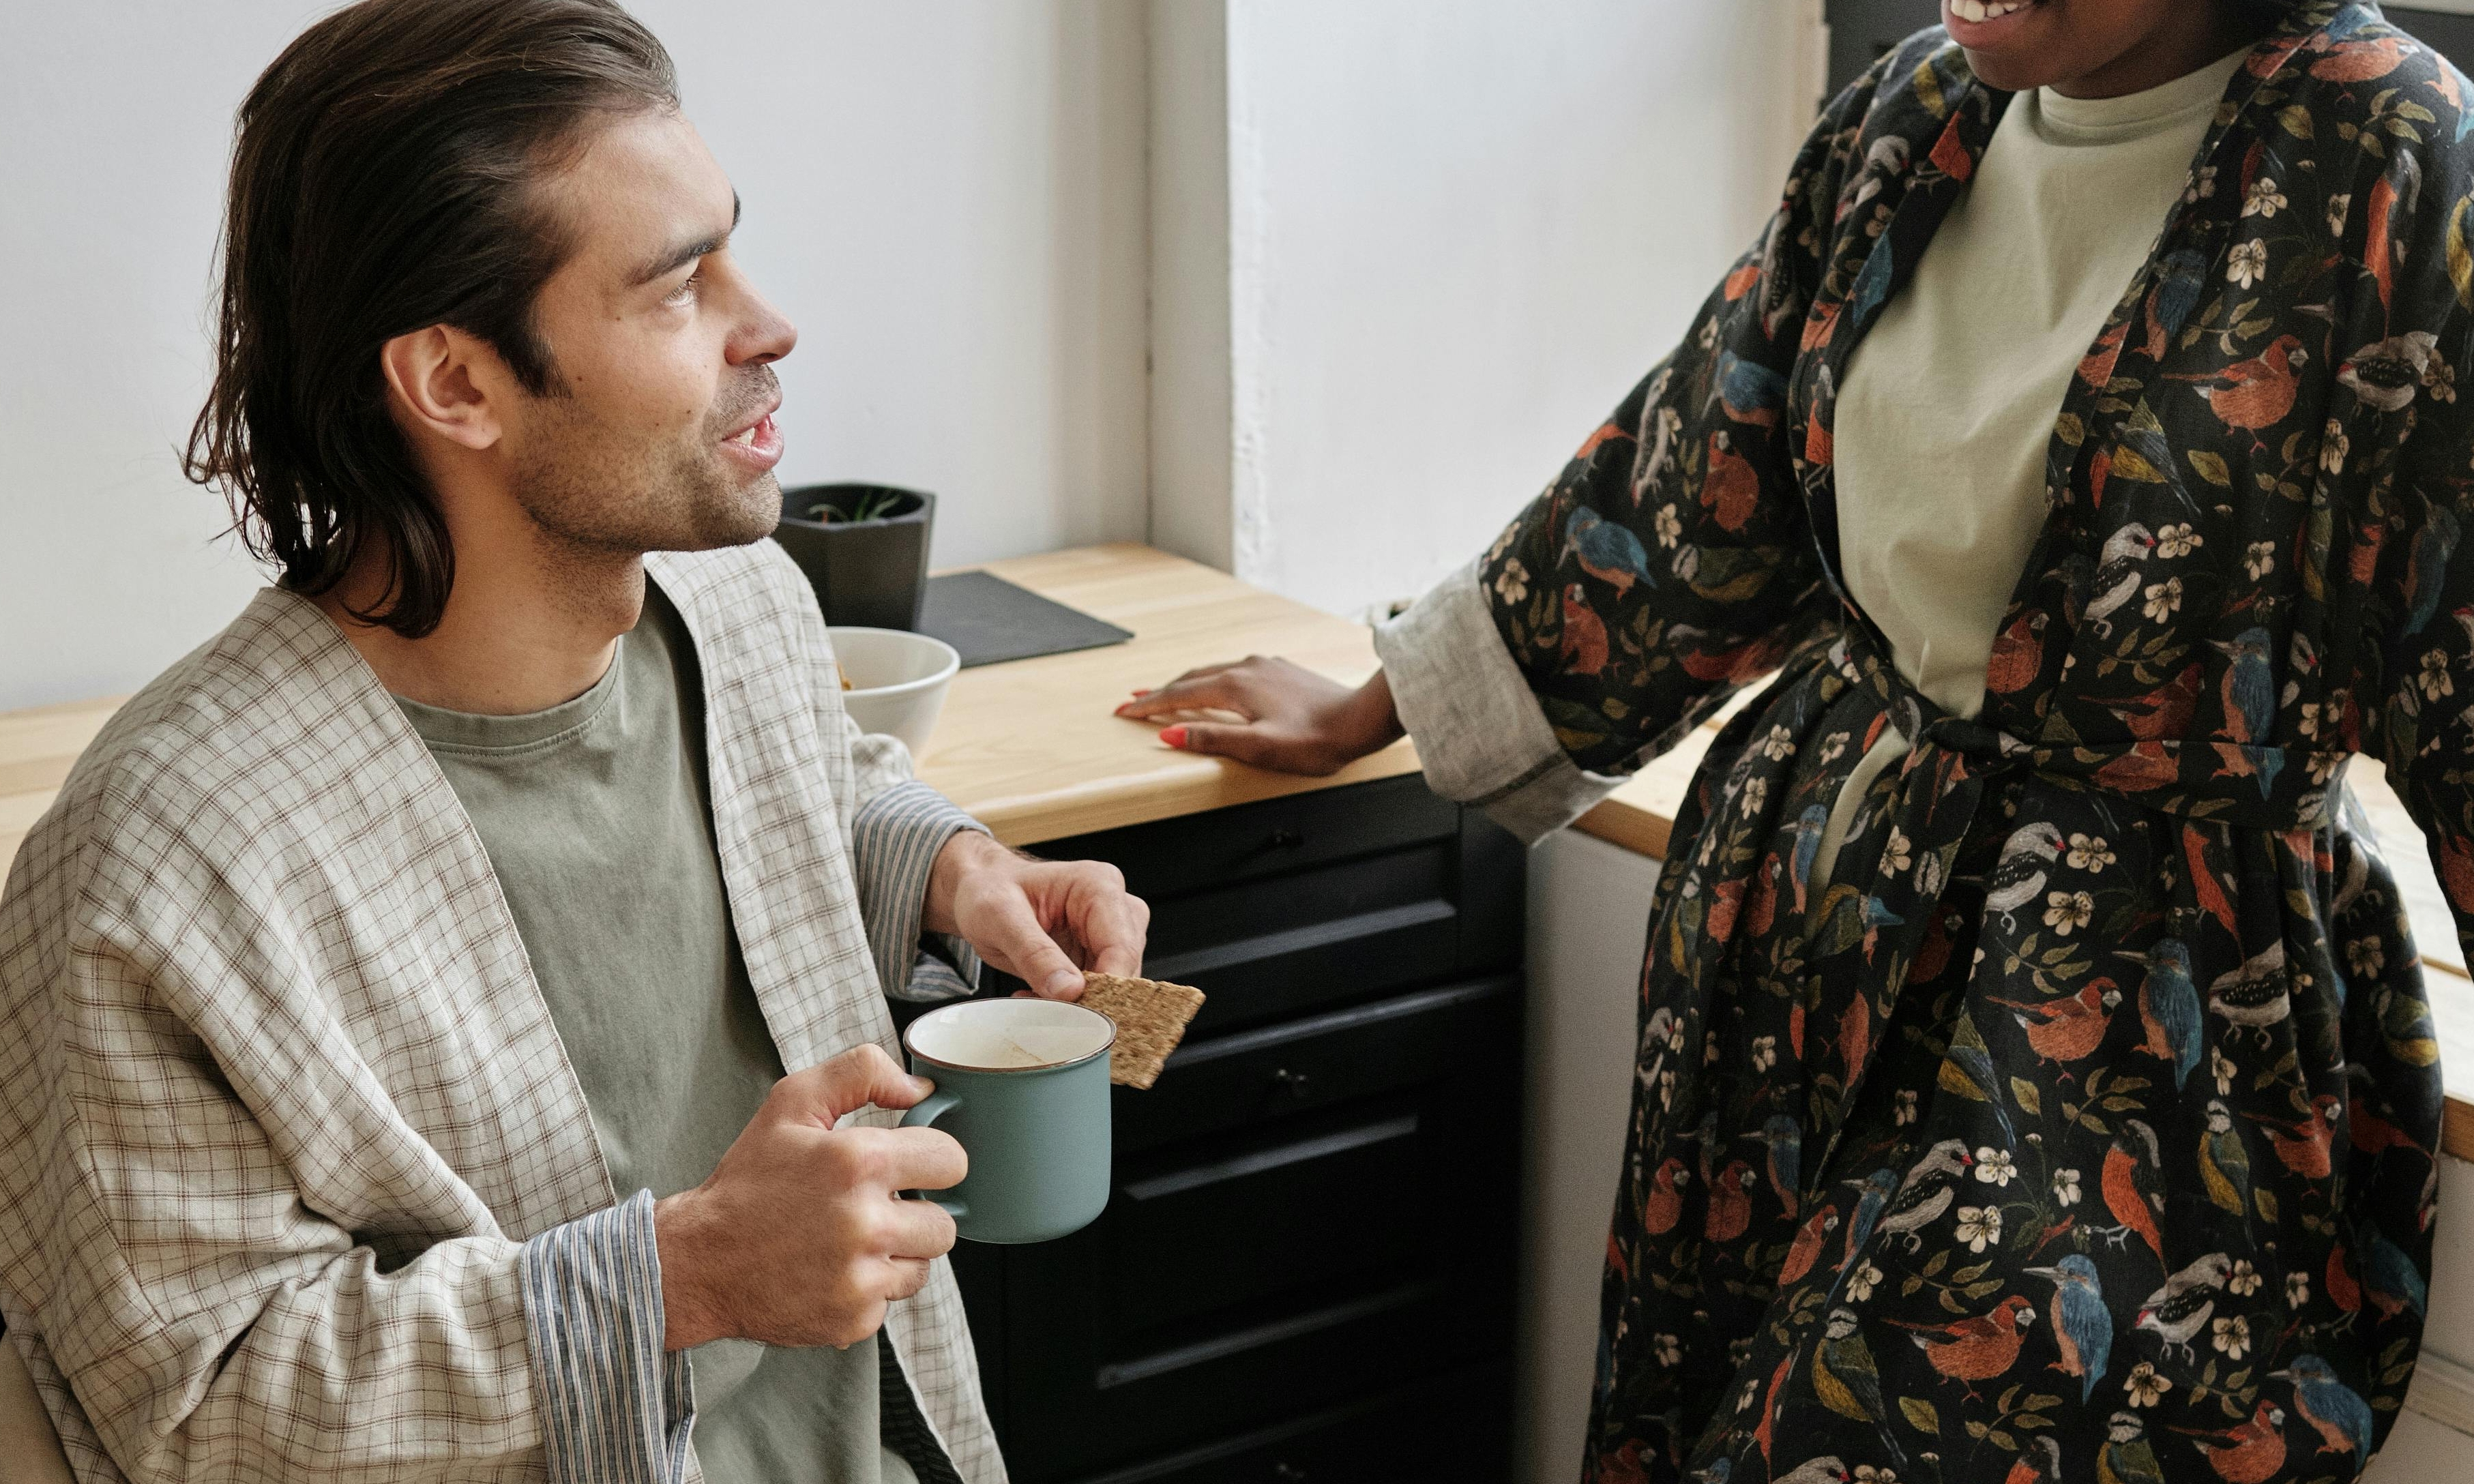 In the kitchen, a woman forces a smile as her husband chats | Source: Pexels